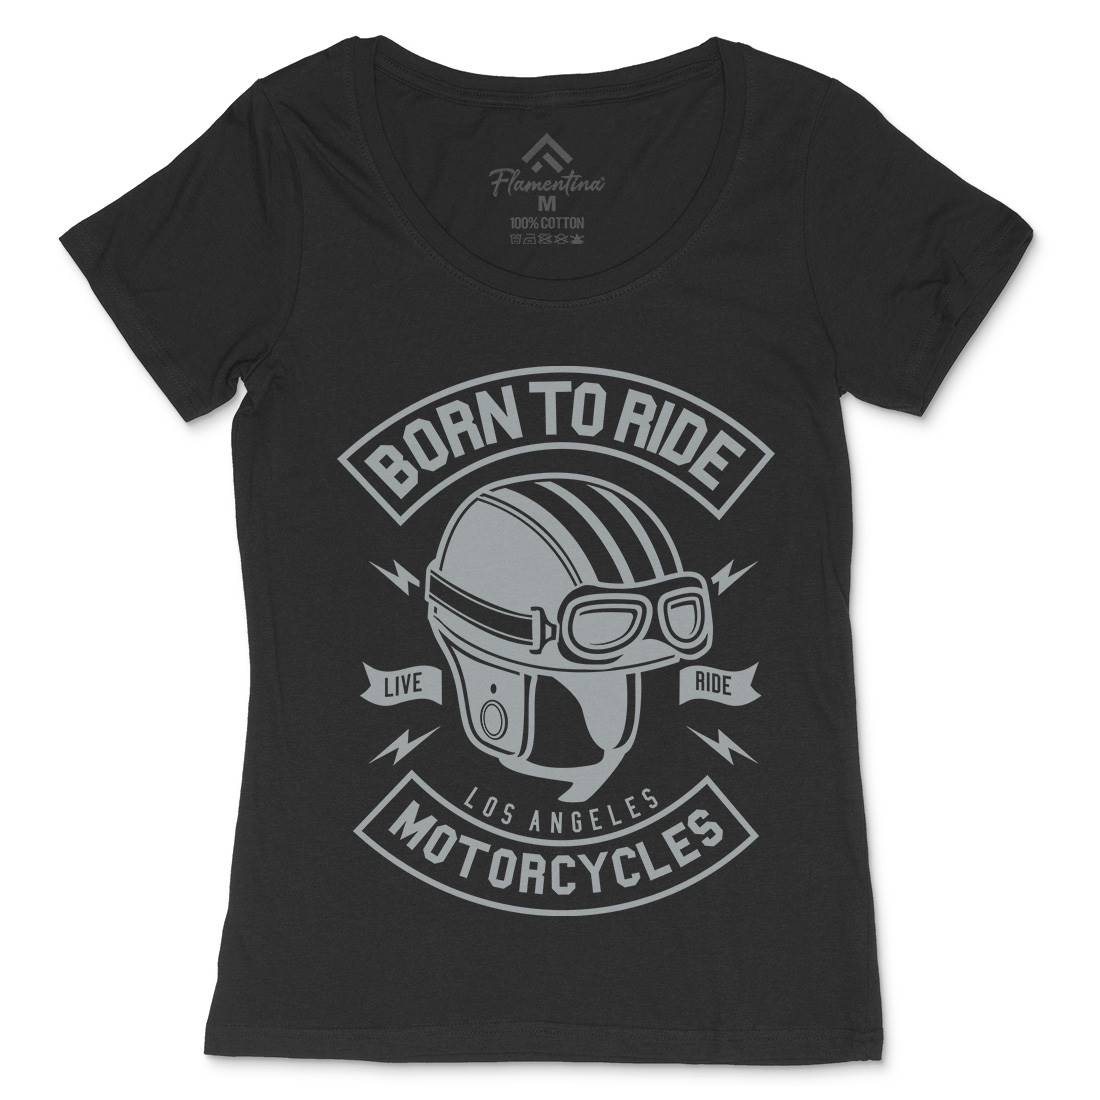 Born To Ride Womens Scoop Neck T-Shirt Motorcycles A212